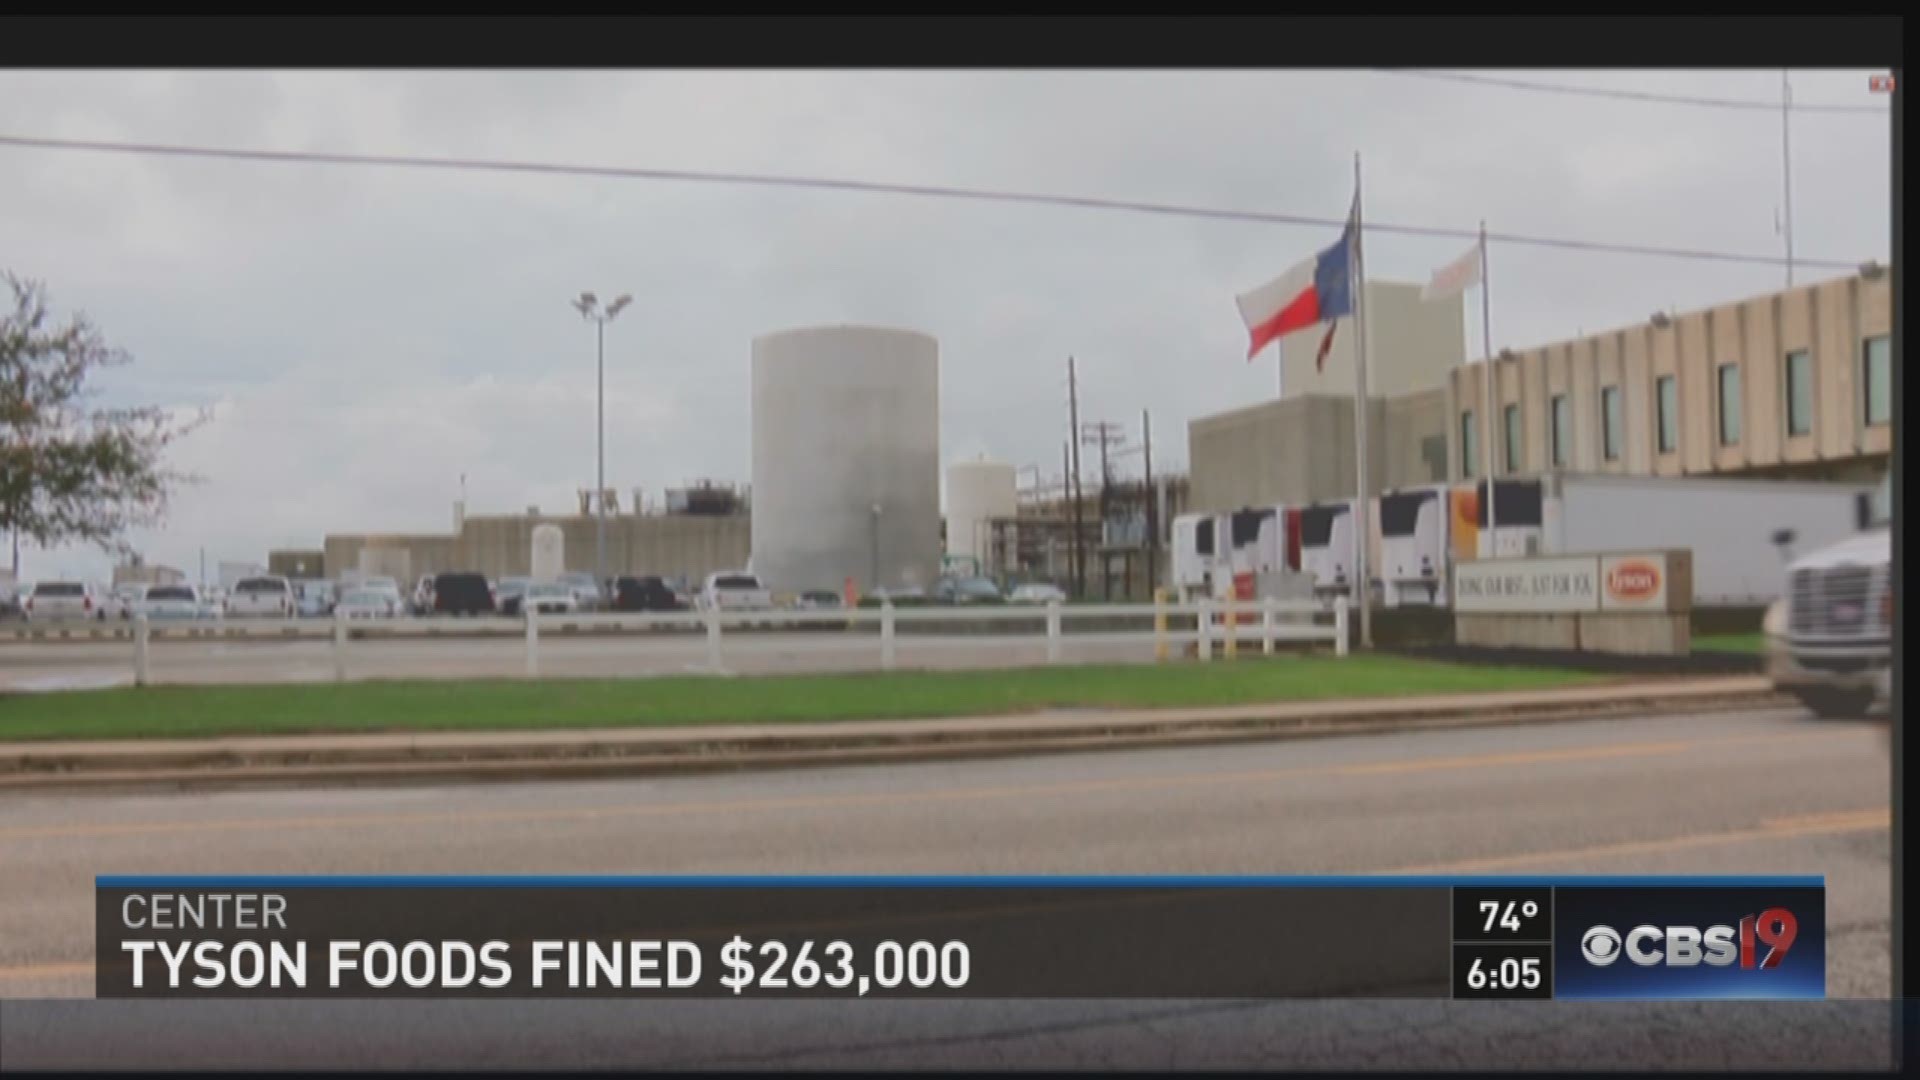 Tyson Foods was fined for several violations and repeat offenses.